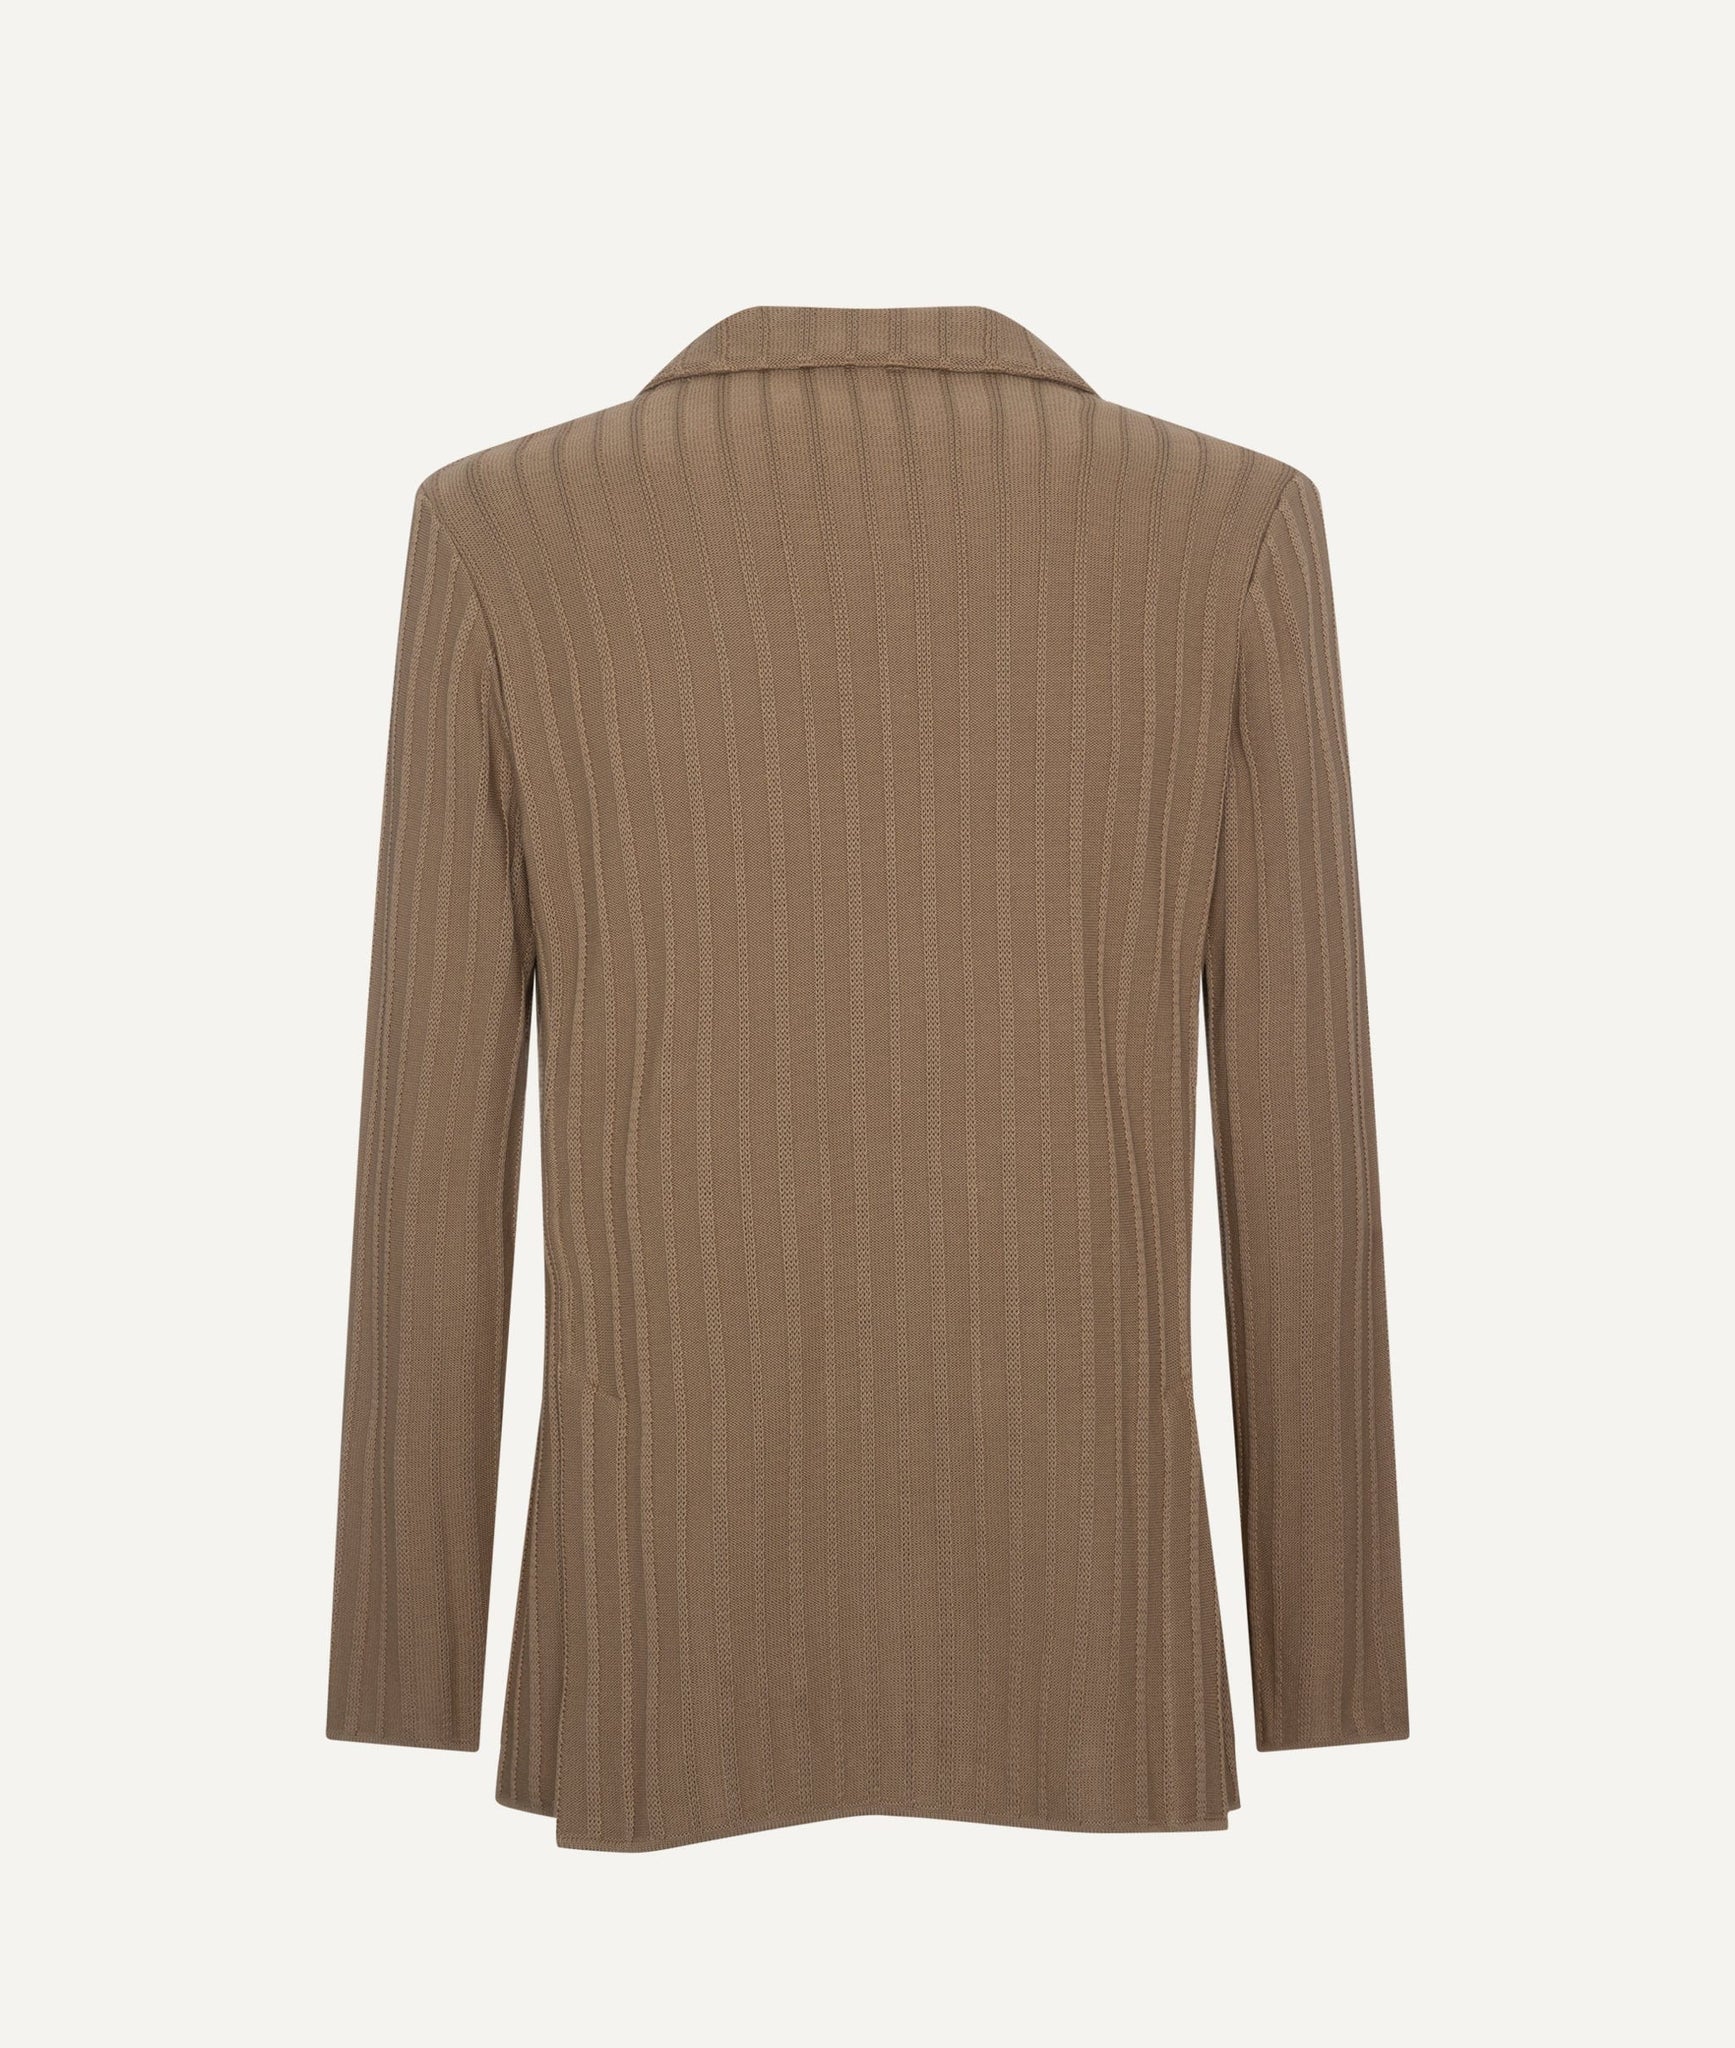 Lardini - Double Breasted Ribbed Cardigan in Cotton